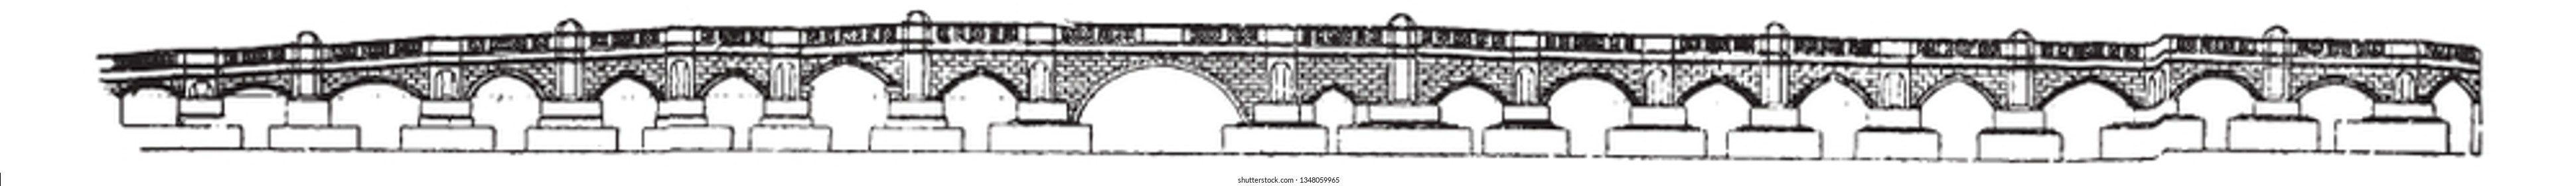 London Bridge have spanned the River Thames between the City of London and Southwark in central London, vintage line drawing or engraving illustration. svg